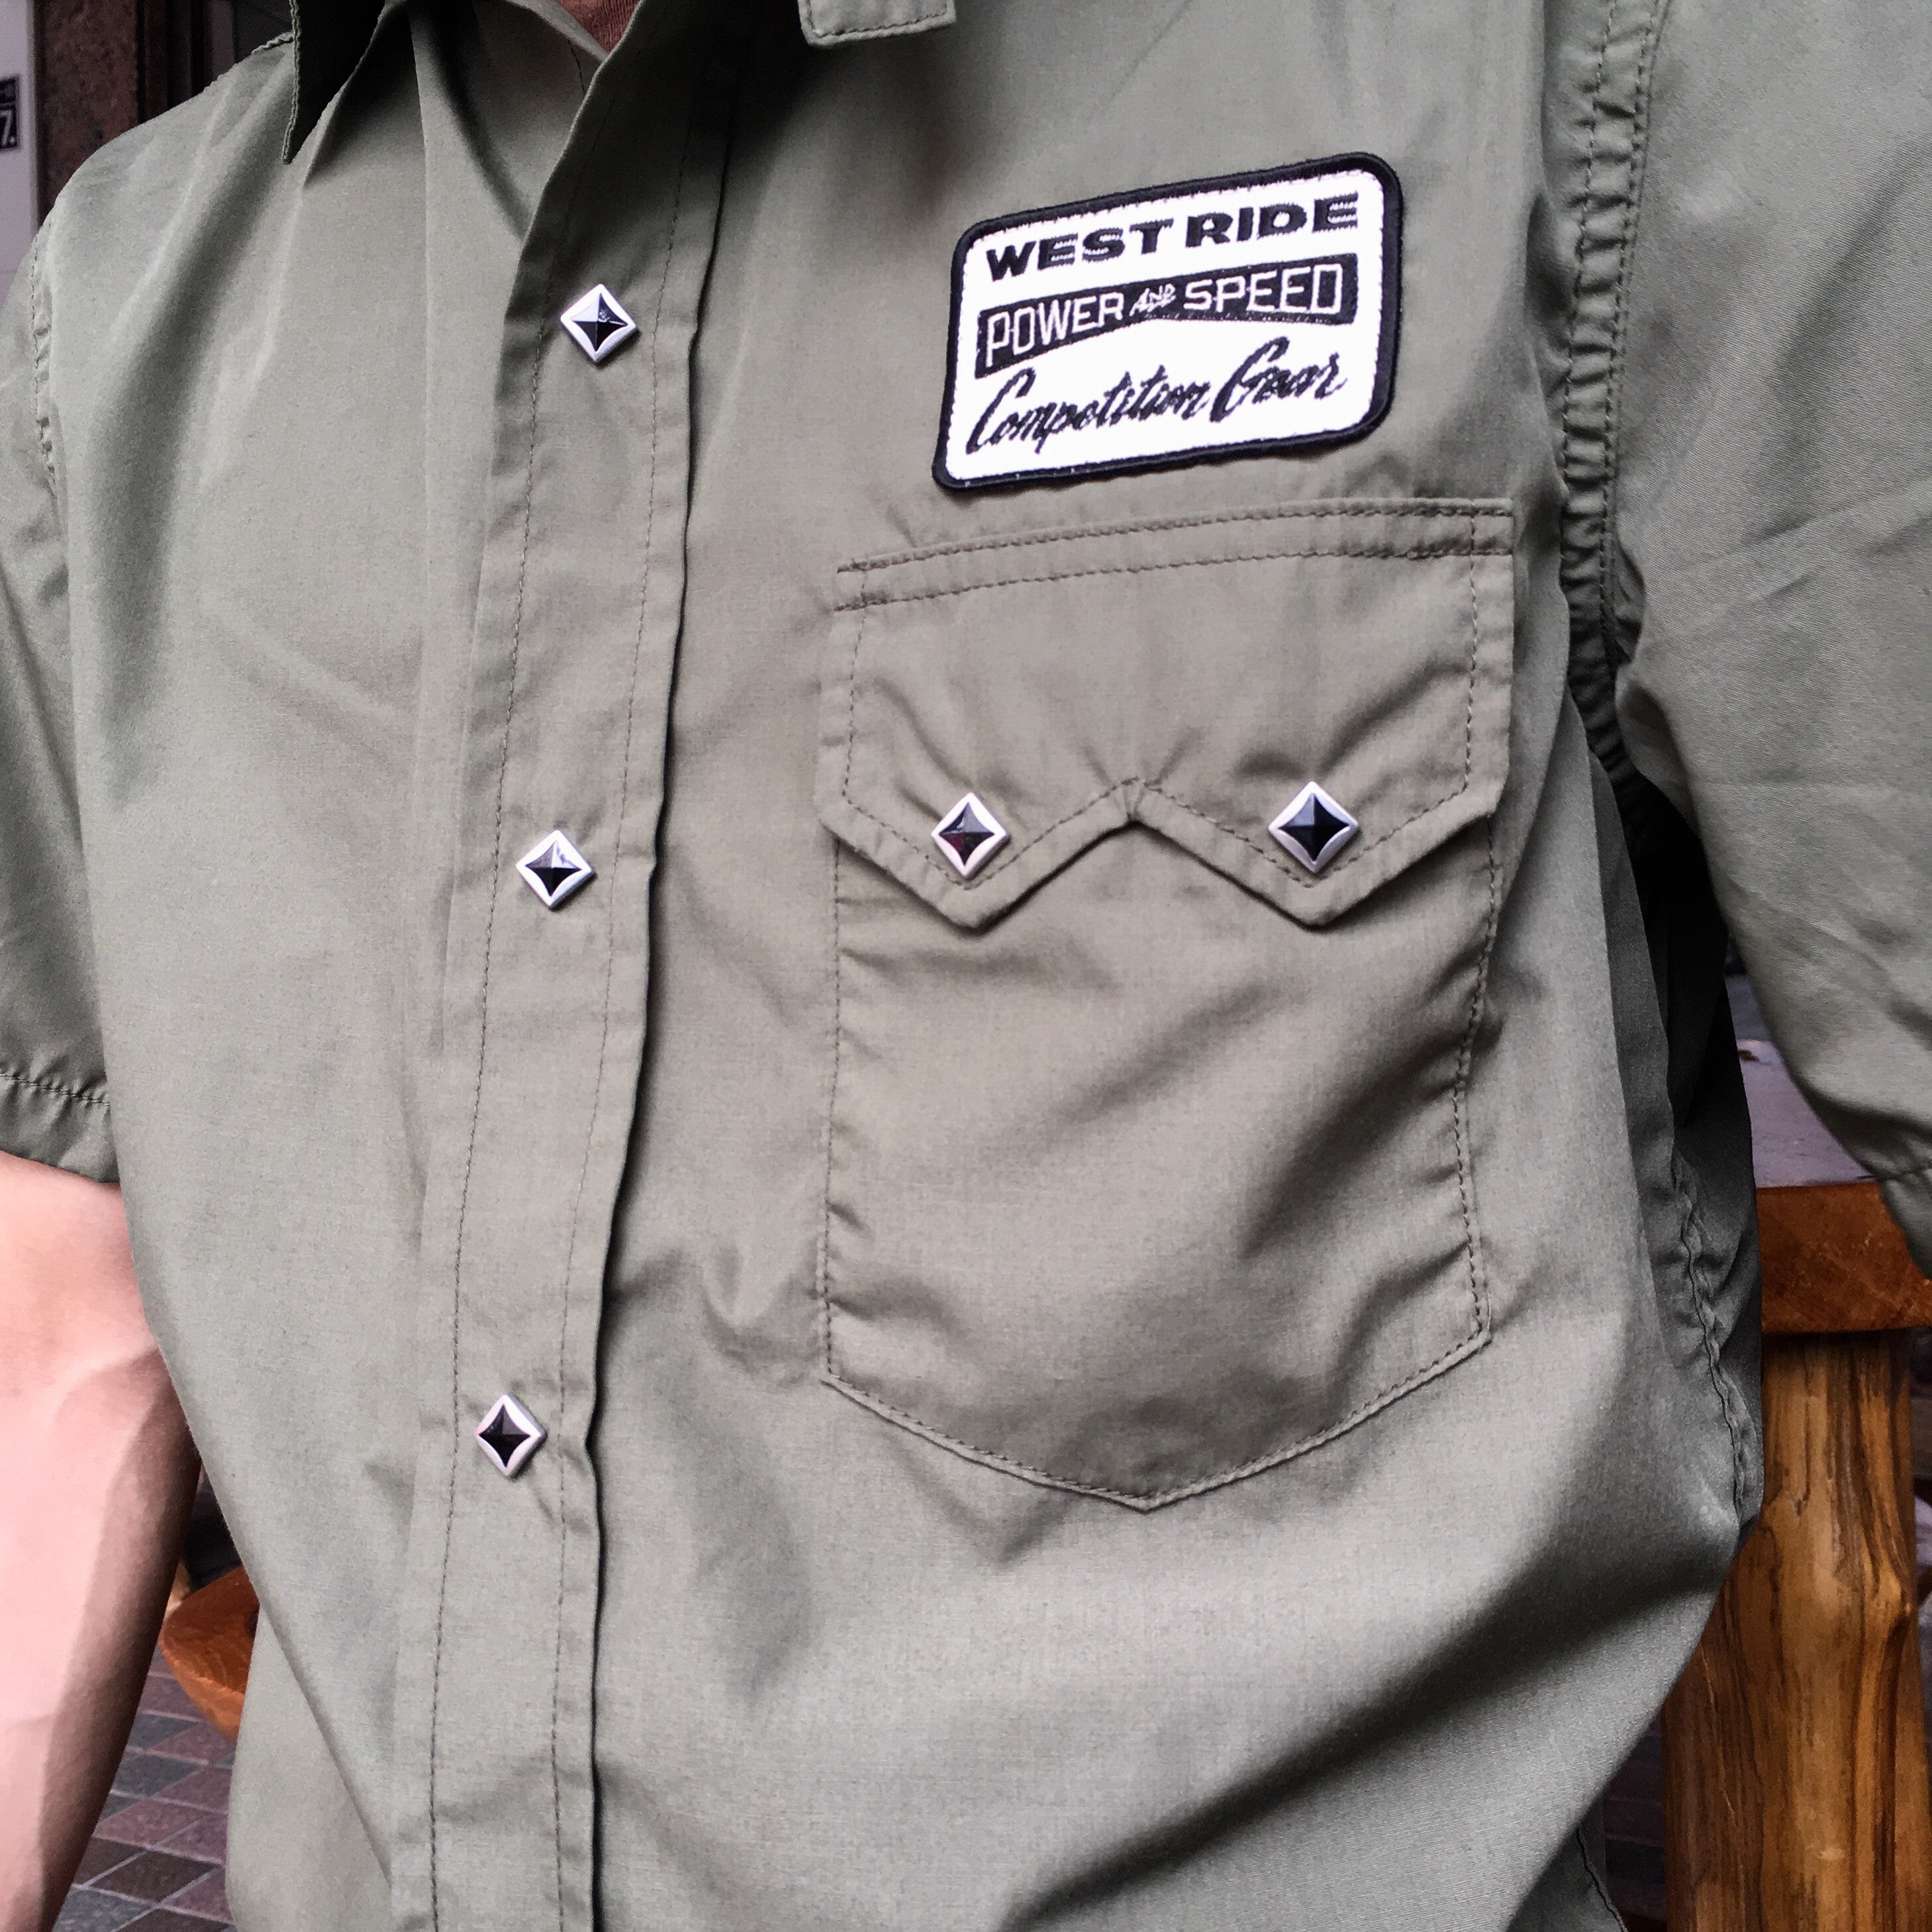 May club -【WESTRIDE】SNAP WORK S/S SHIRTS - OLIVE